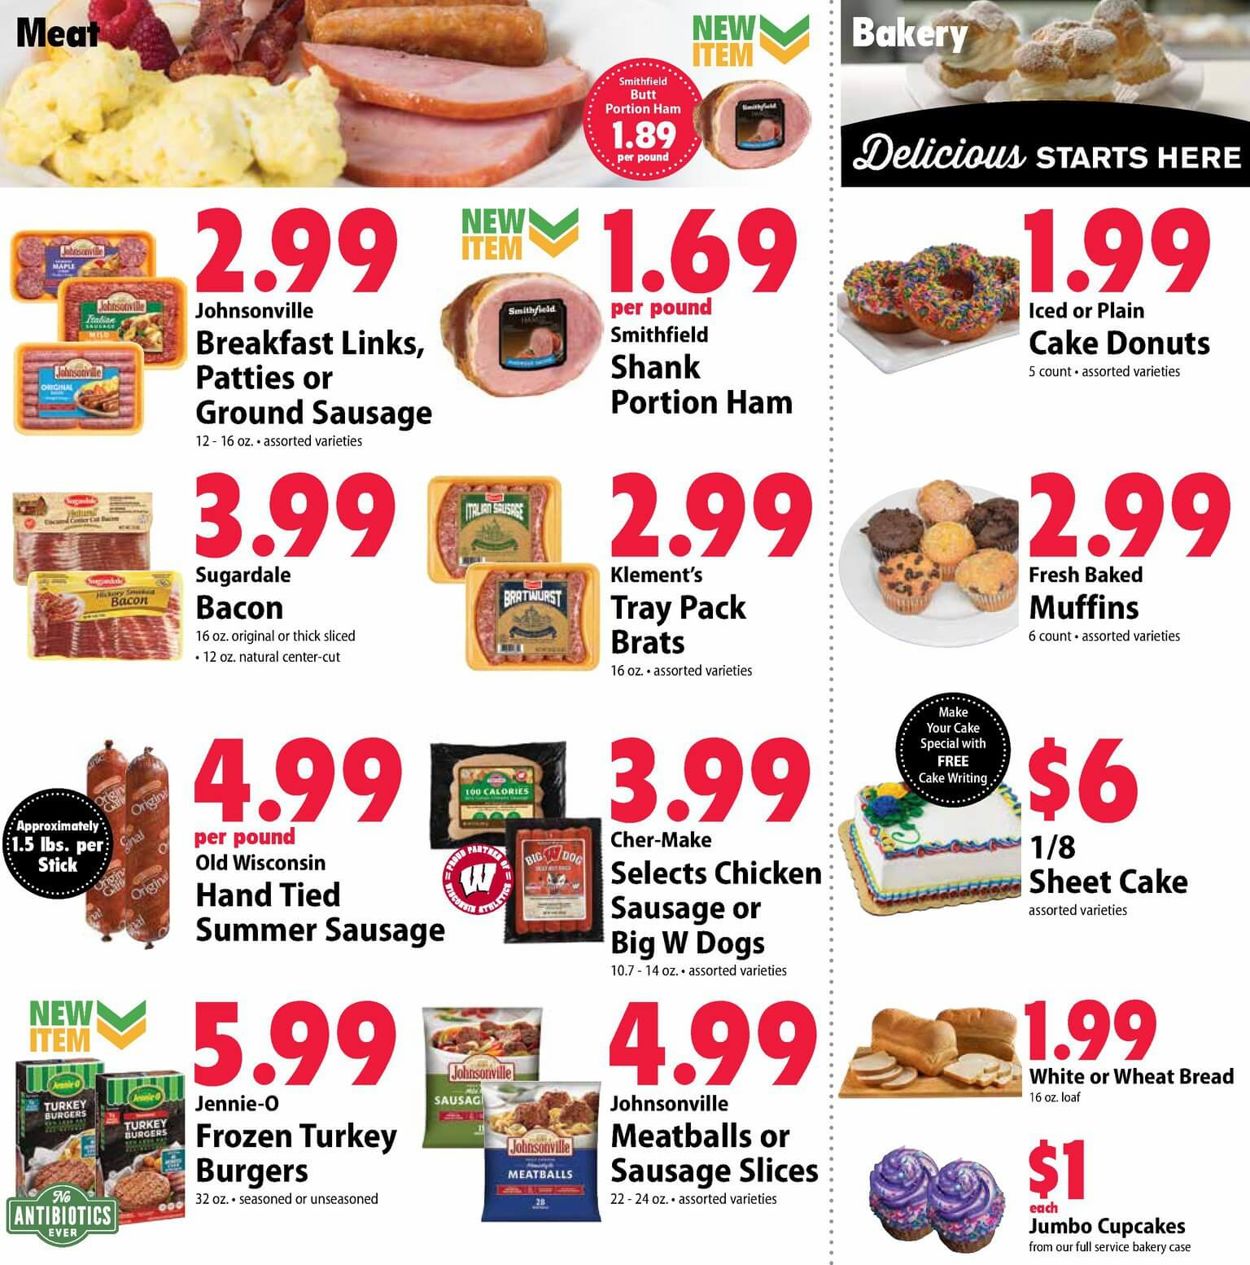 Festival Foods Current weekly ad 07/31 - 08/06/2019 [7] - frequent-ads.com